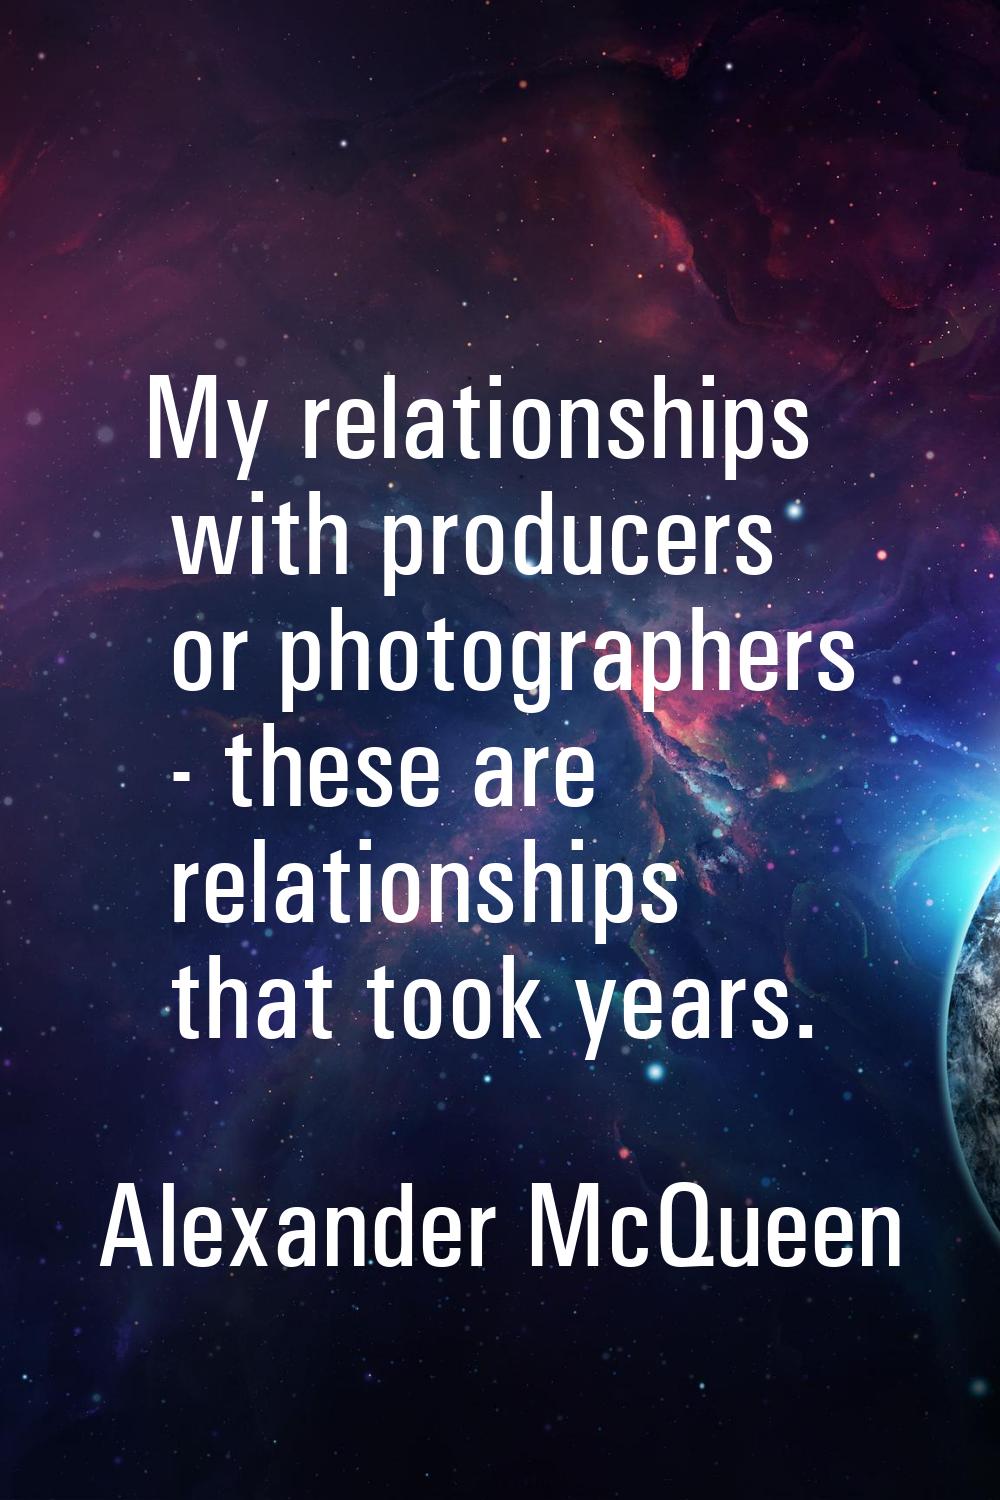 My relationships with producers or photographers - these are relationships that took years.